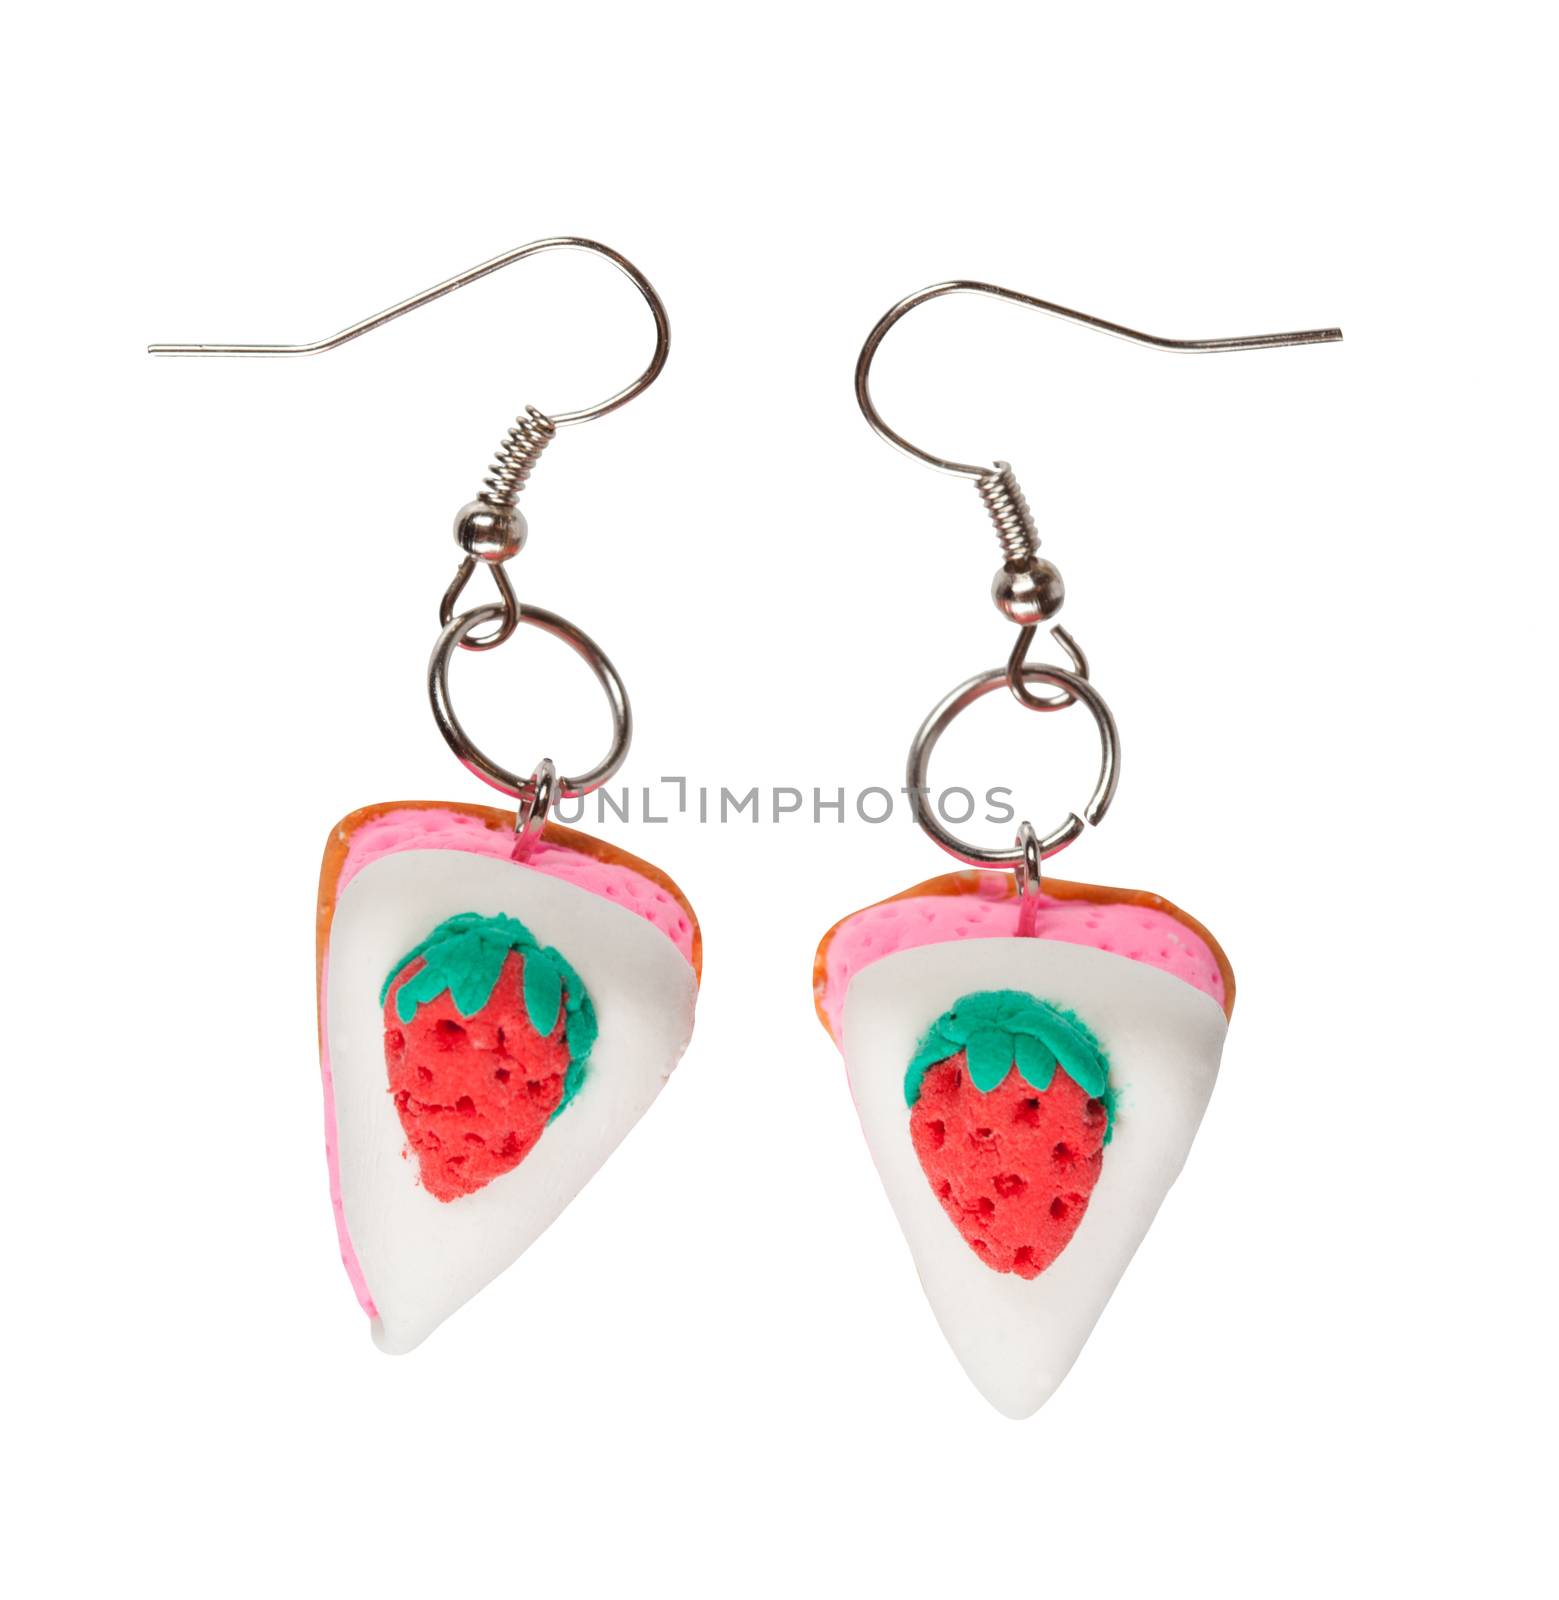 Earrings made of plastic in the form of the cake with strawberry by AleksandrN